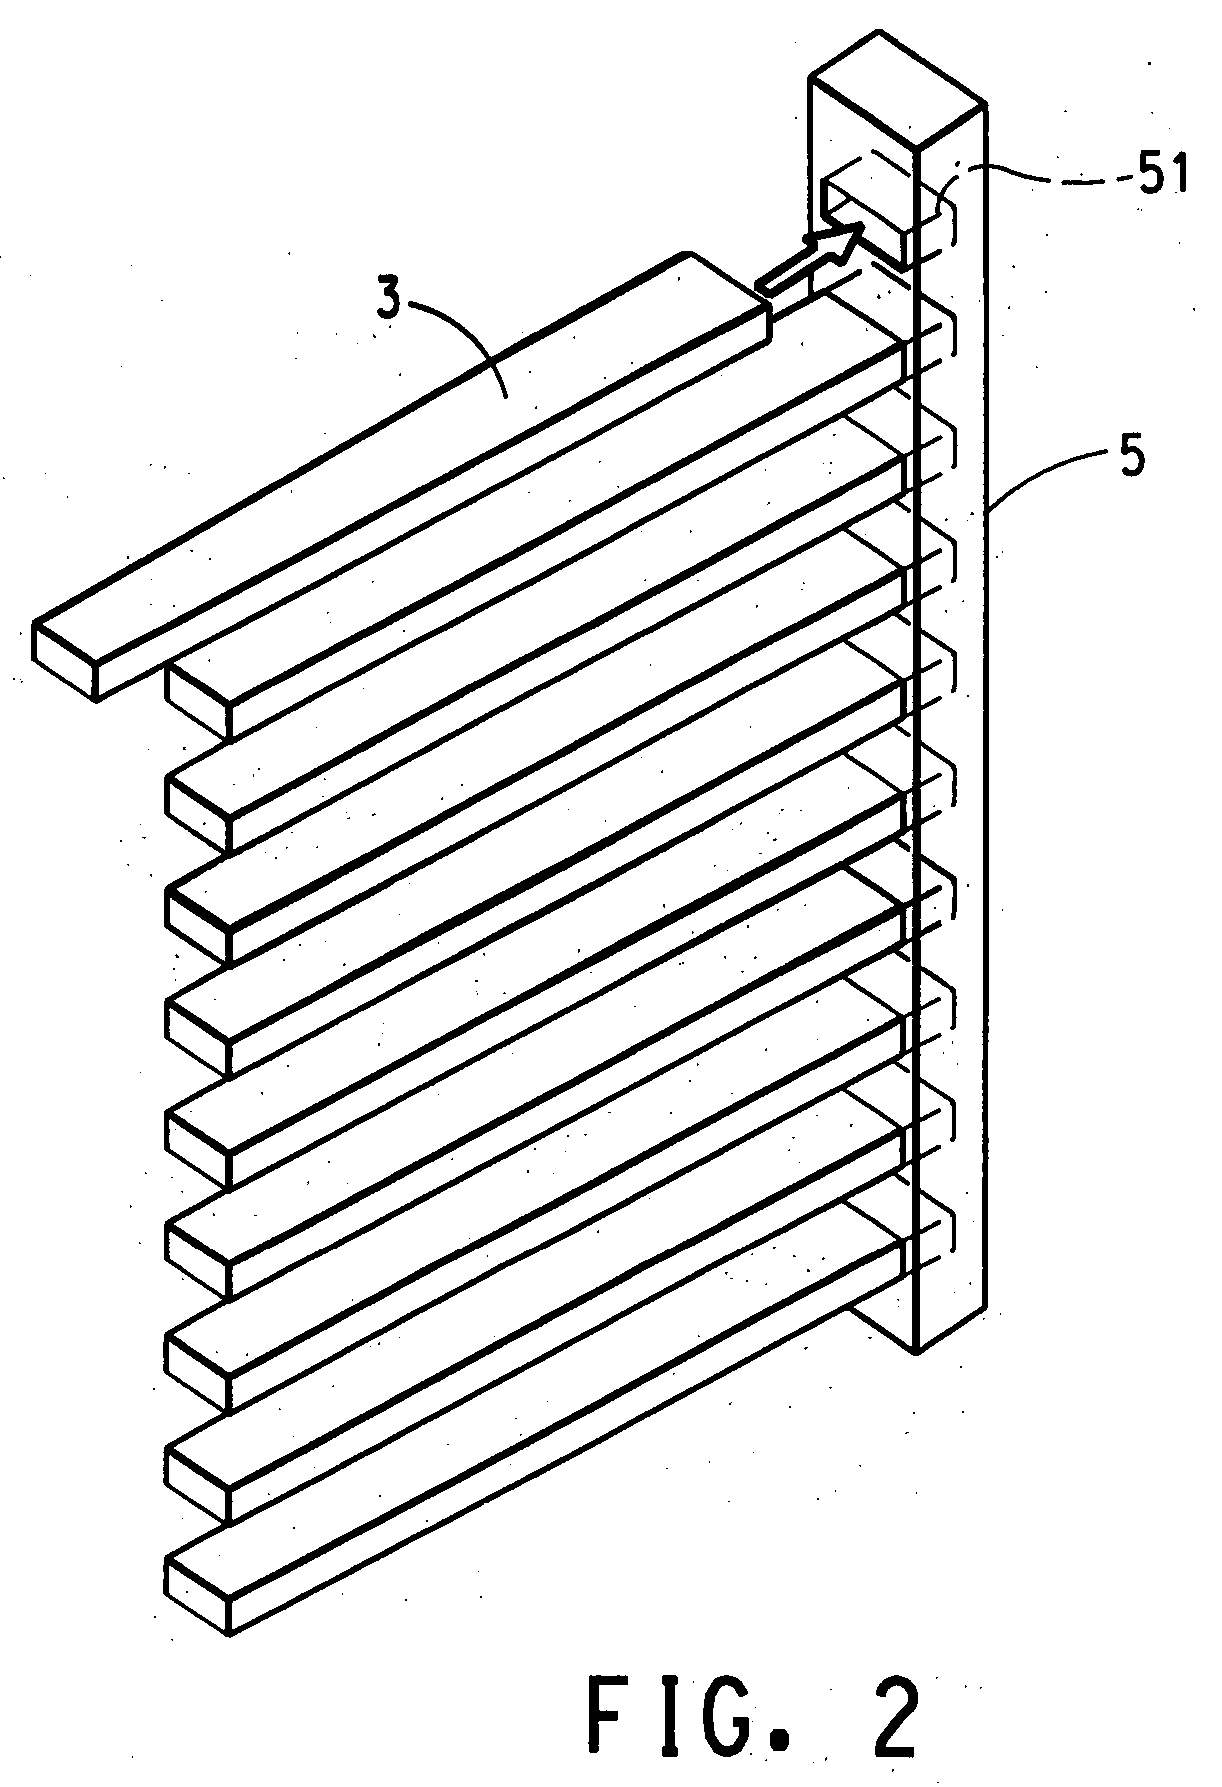 Supporting bar for substrate cassette